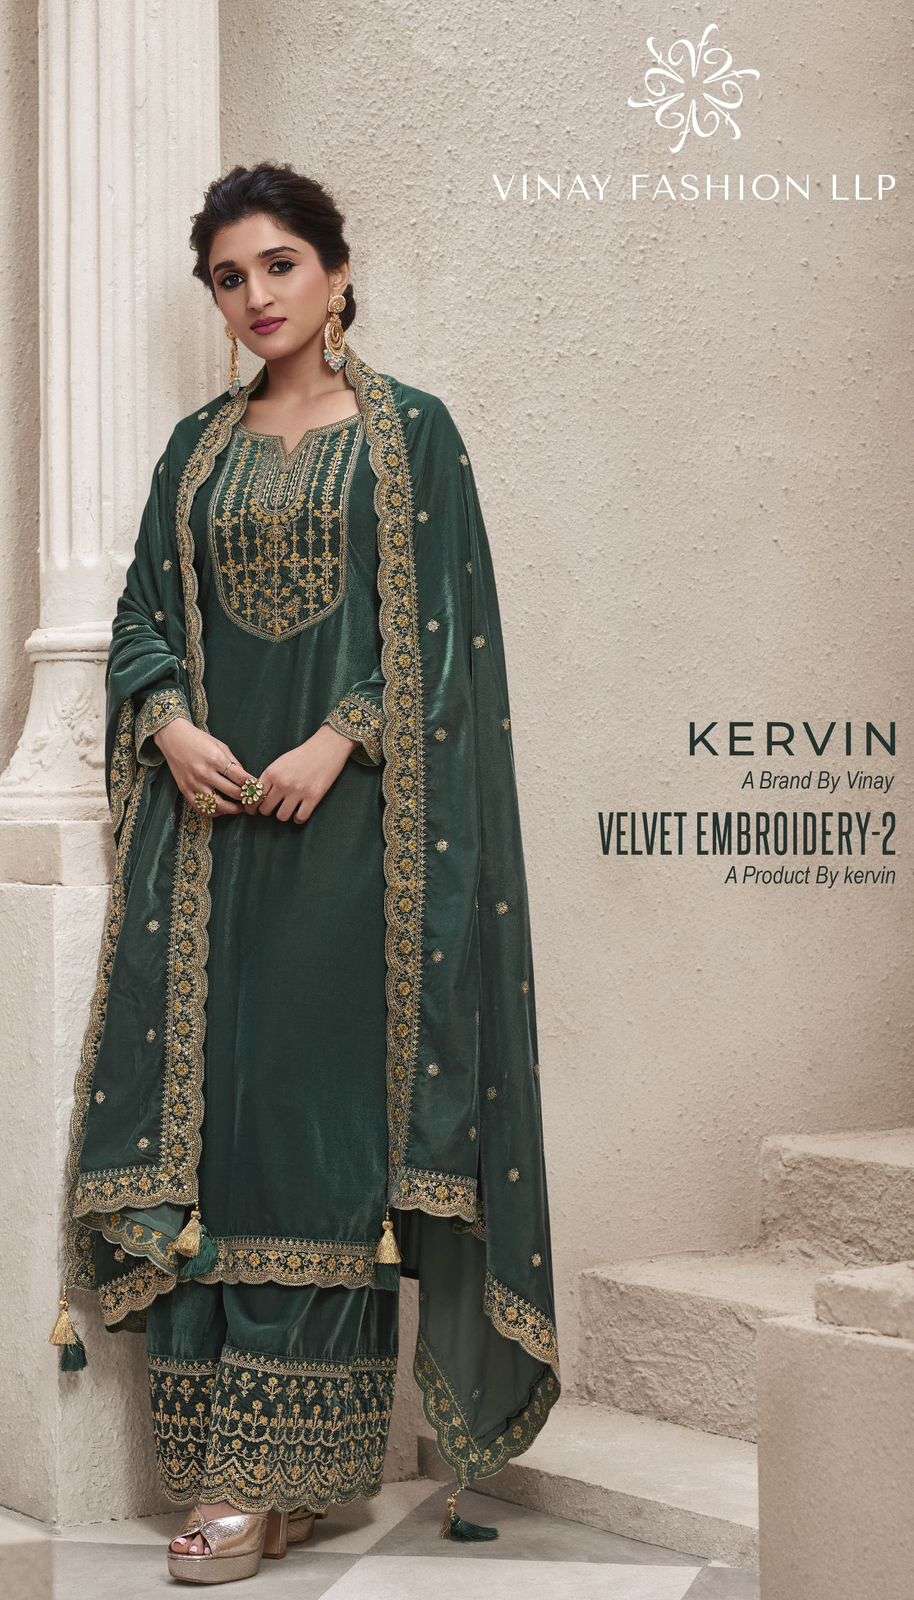 vinay fashion llp catalogue kervin velvet embroidery 2 series 65941 to 65946 meena embroidered velvet designer heavy embroidery velvet suit collection 